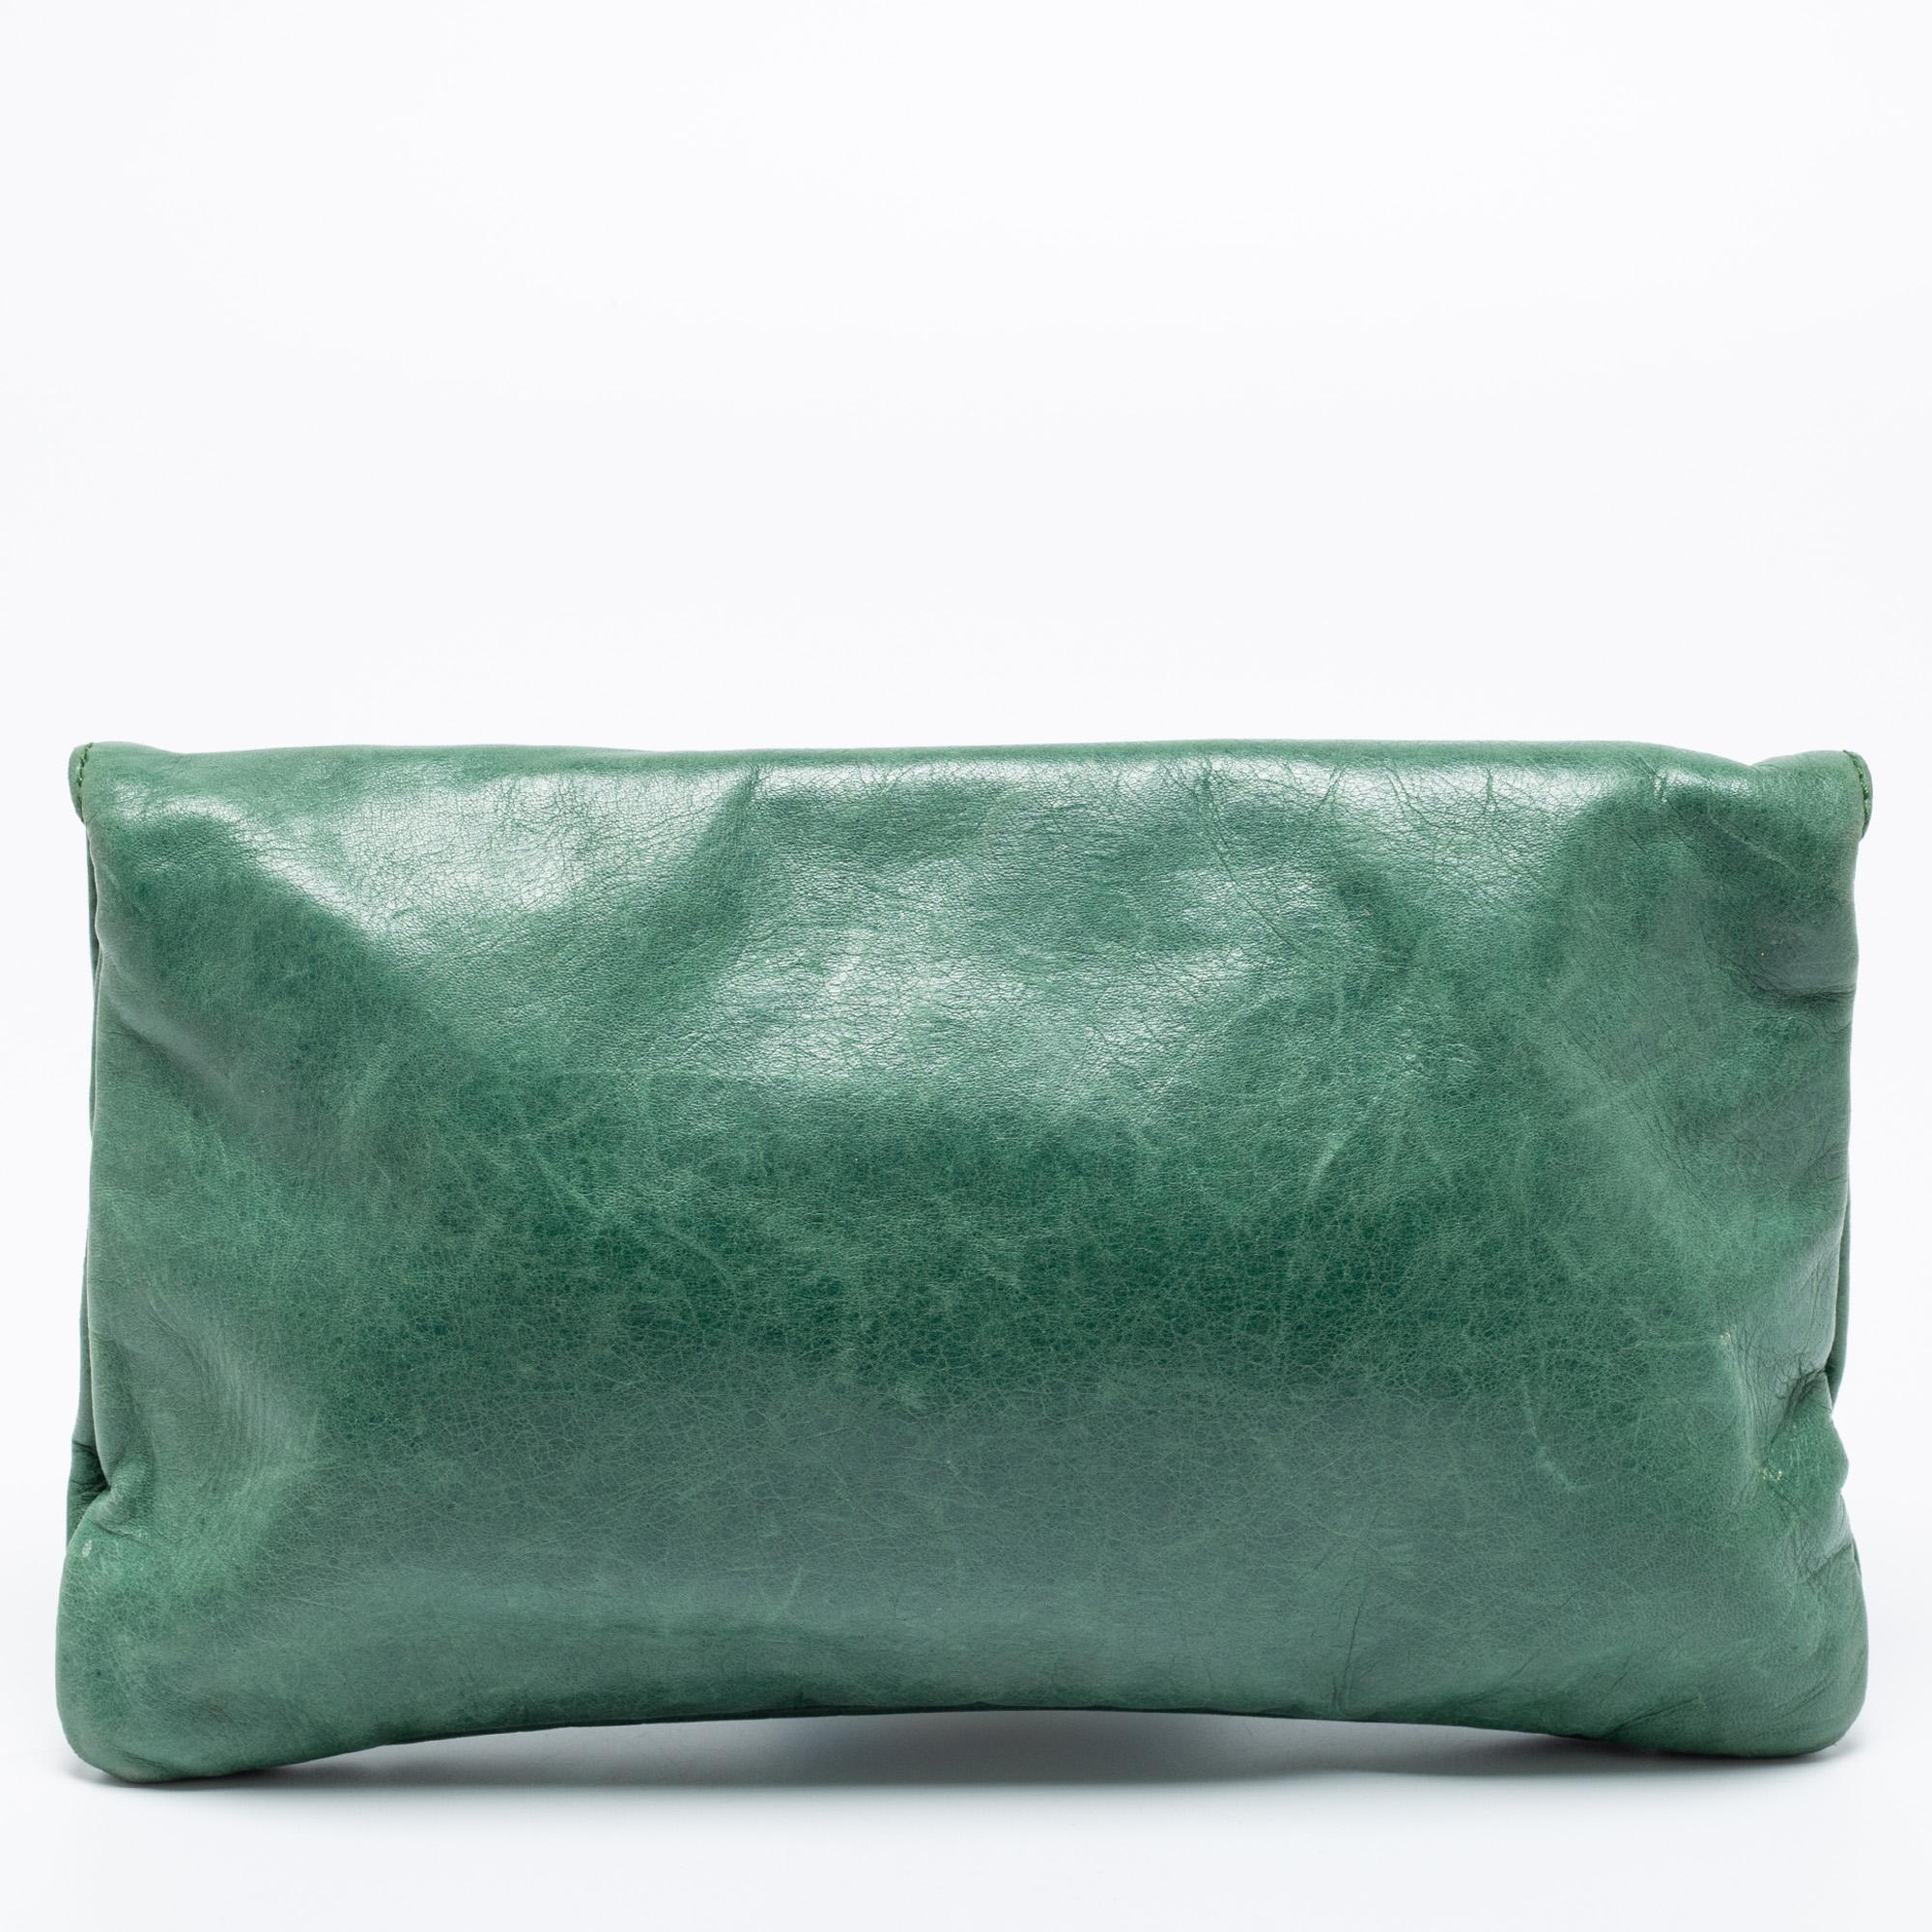 This Balenciaga GGH clutch is perfect to carry for days when you need only your essentials. Punctuated with the label's signature studs, this envelope-style clutch features a zippered pocket on the flap and flaunts a green hue. It is complete with a